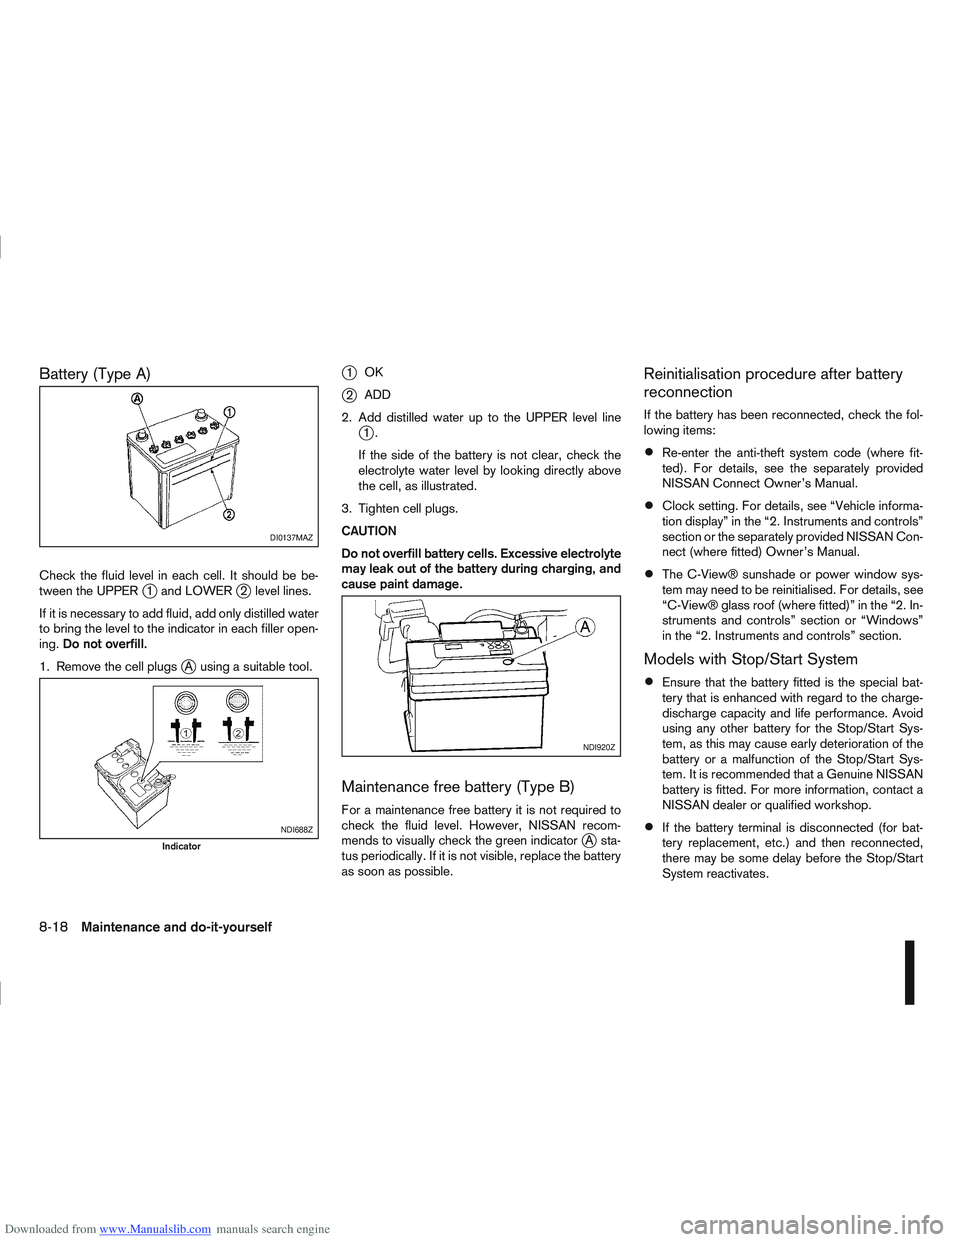 NISSAN QASHQAI 2006  Owners Manual Downloaded from www.Manualslib.com manuals search engine Battery (Type A)
Check the fluid level in each cell. It should be be-
tween the UPPERj1 and LOWERj2 level lines.
If it is necessary to add flui